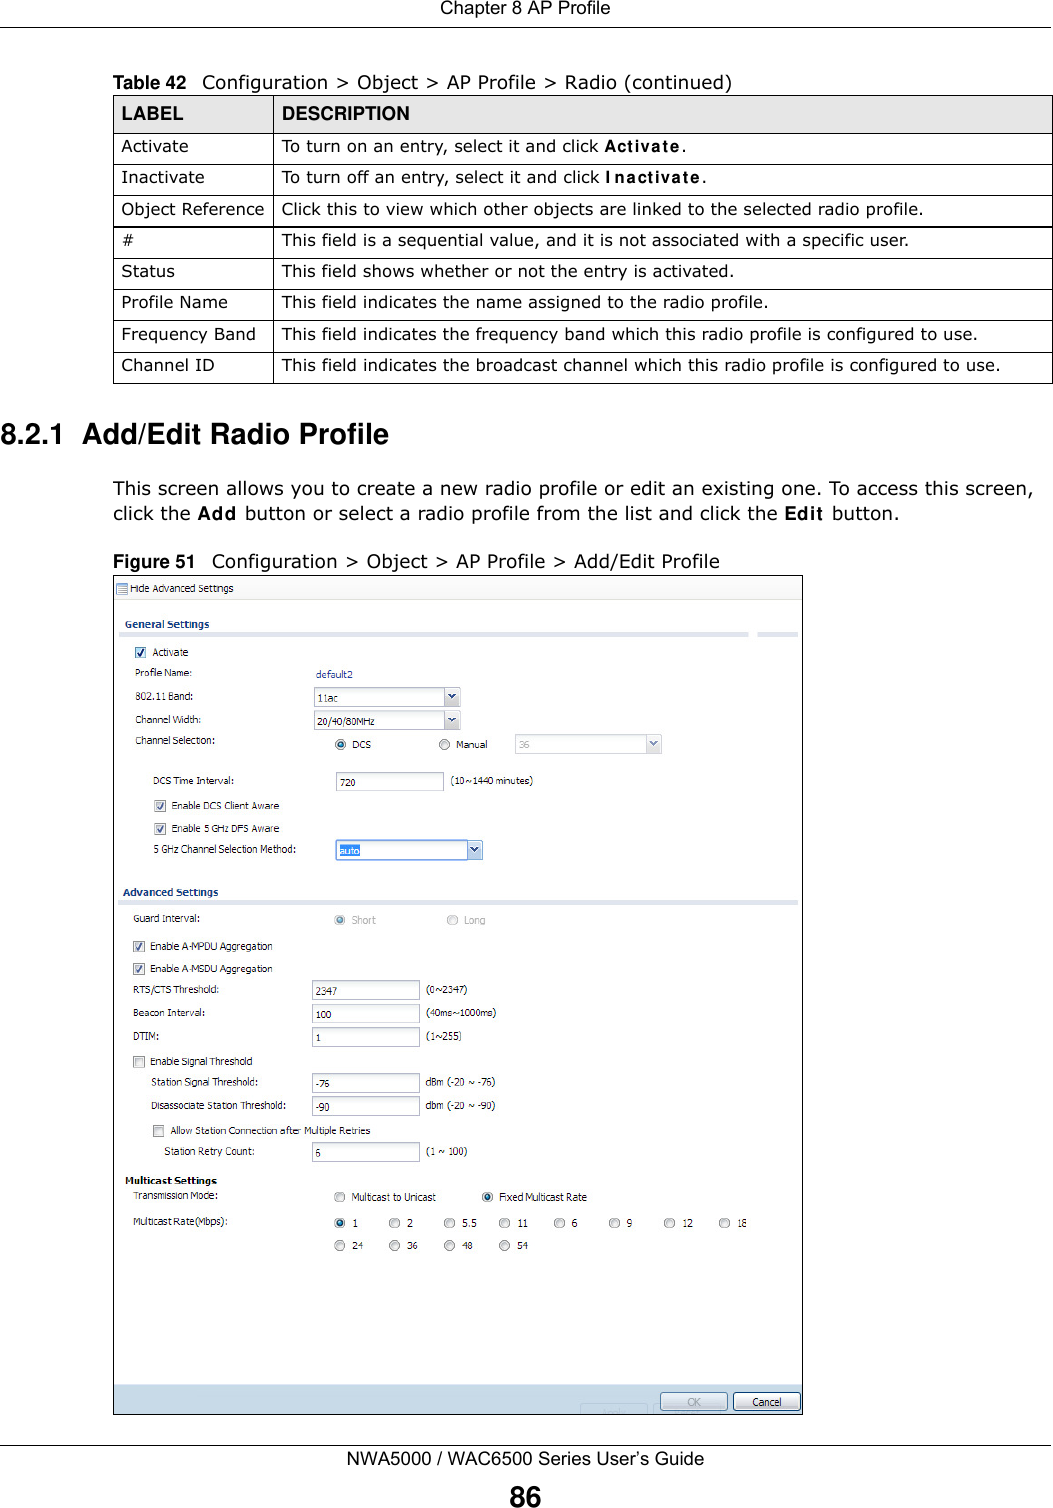 Chapter 8 AP ProfileNWA5000 / WAC6500 Series User’s Guide868.2.1  Add/Edit Radio ProfileThis screen allows you to create a new radio profile or edit an existing one. To access this screen, click the Add button or select a radio profile from the list and click the Edit  button. Figure 51   Configuration &gt; Object &gt; AP Profile &gt; Add/Edit Profile Activate To turn on an entry, select it and click Act iv a t e.Inactivate To turn off an entry, select it and click I n a ct iva t e .Object Reference Click this to view which other objects are linked to the selected radio profile.# This field is a sequential value, and it is not associated with a specific user.Status This field shows whether or not the entry is activated.Profile Name This field indicates the name assigned to the radio profile.Frequency Band This field indicates the frequency band which this radio profile is configured to use.Channel ID This field indicates the broadcast channel which this radio profile is configured to use.Table 42   Configuration &gt; Object &gt; AP Profile &gt; Radio (continued)LABEL DESCRIPTION